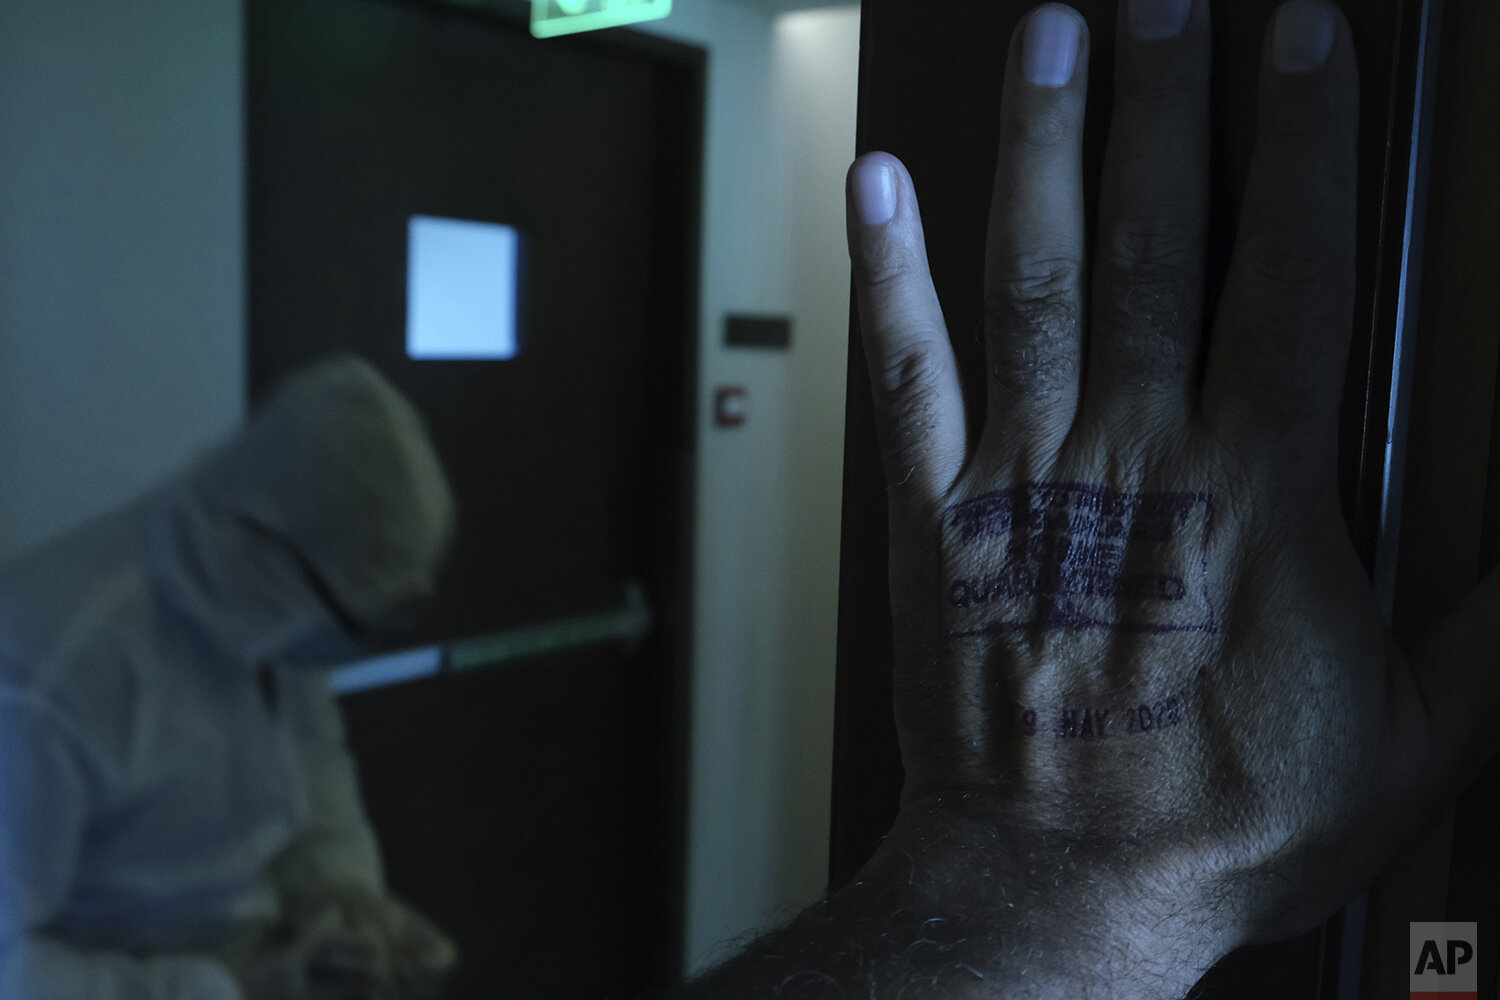  In this April 24, 2020, photo, a stamp for a 14-day home quarantine is seen on the hand of Associated Press photographer Rafiq Maqbool, at a hotel where he was under quarantine, in Mumbai, India. Maqbool was among dozens of journalists who tested po